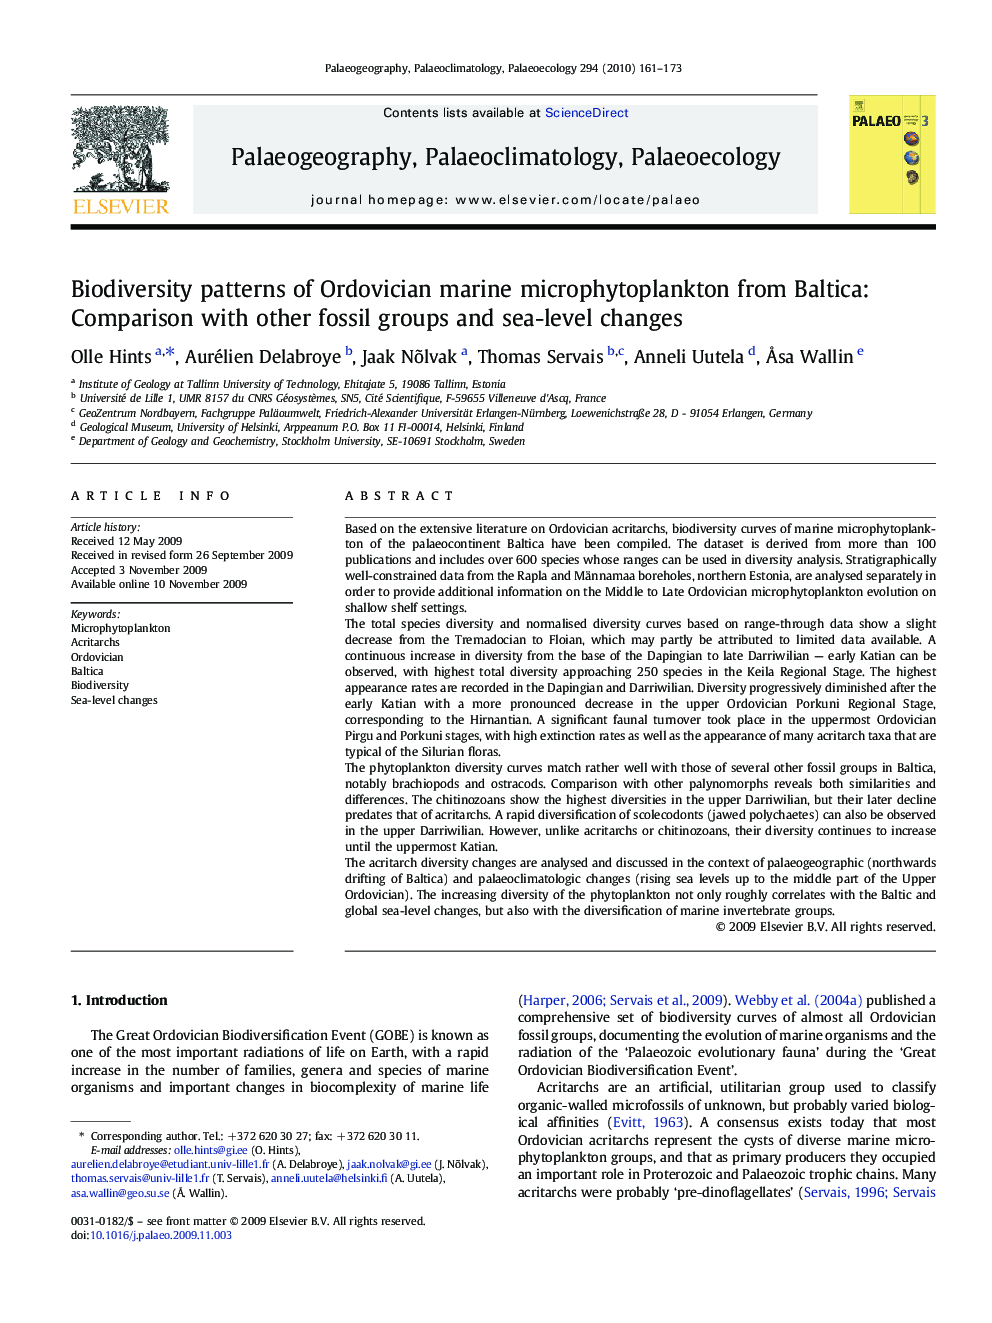 Biodiversity patterns of Ordovician marine microphytoplankton from Baltica: Comparison with other fossil groups and sea-level changes